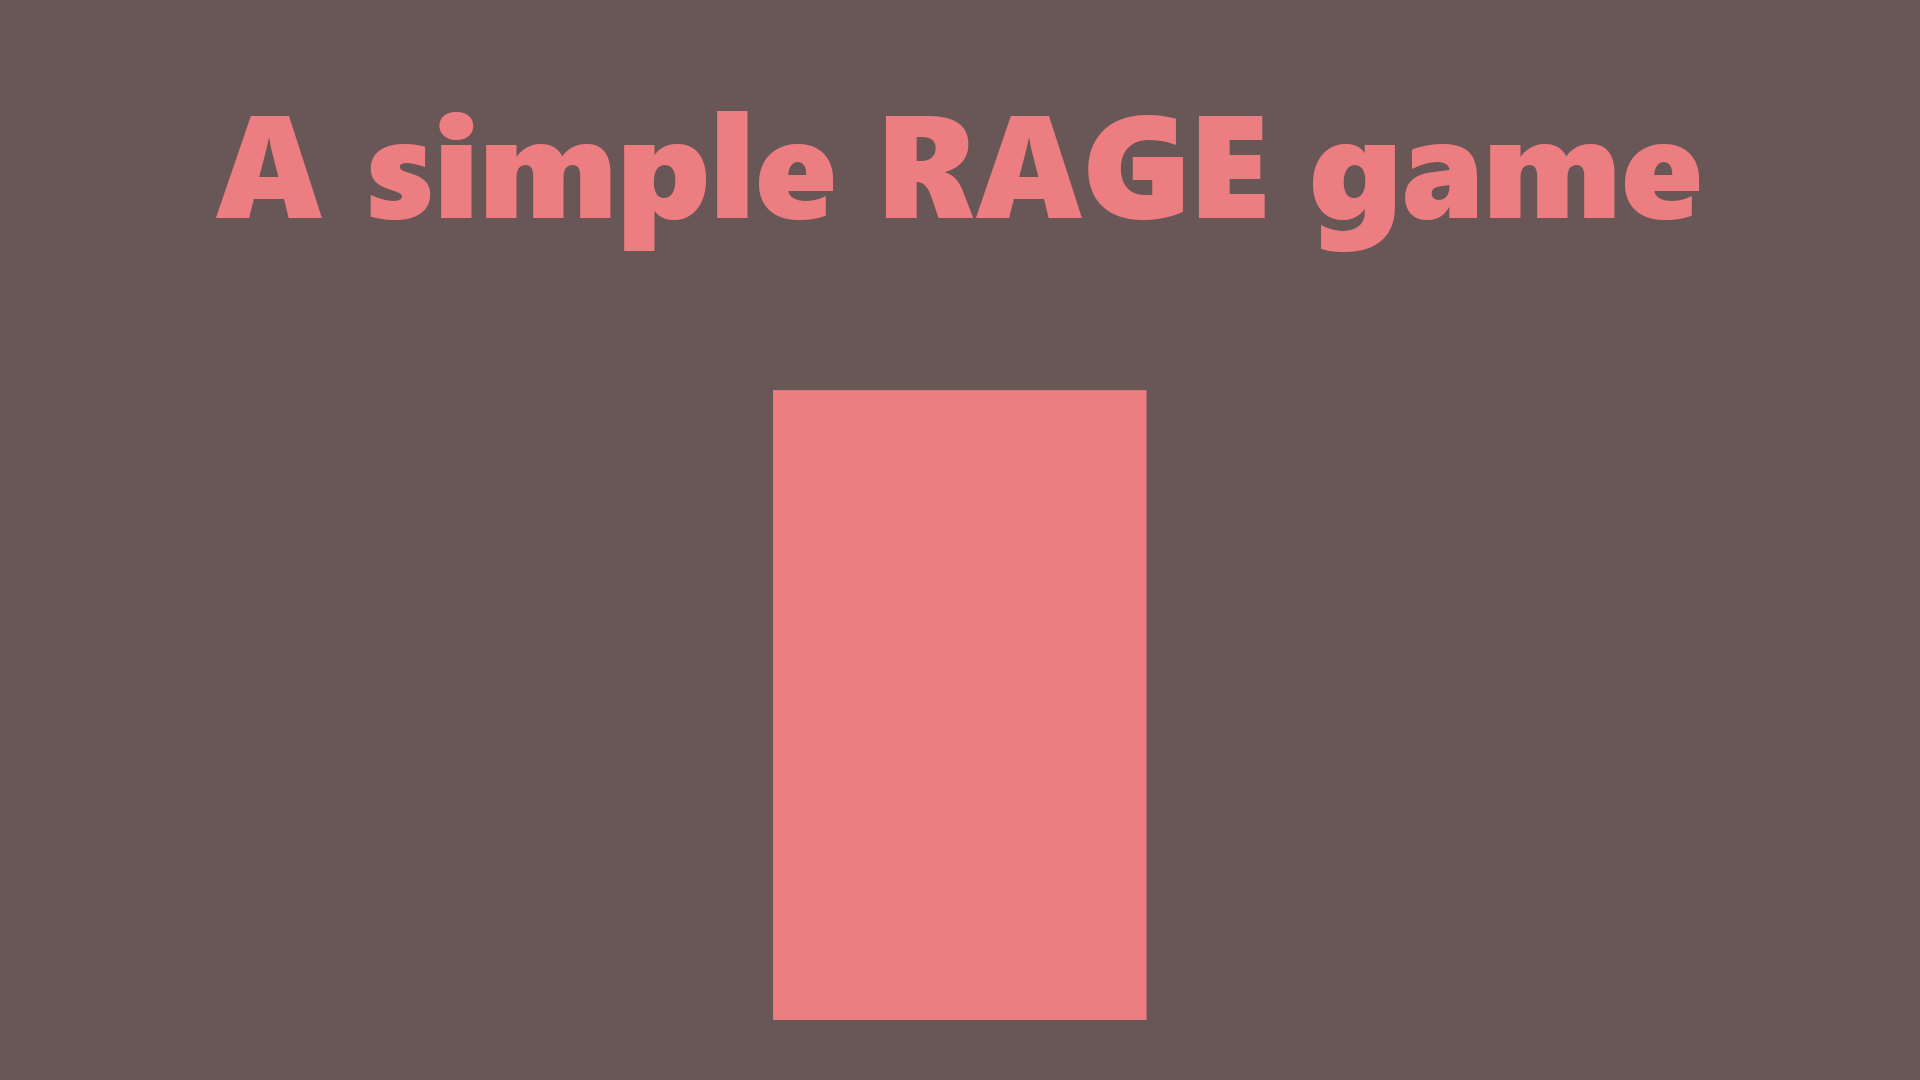 A simple RAGE game